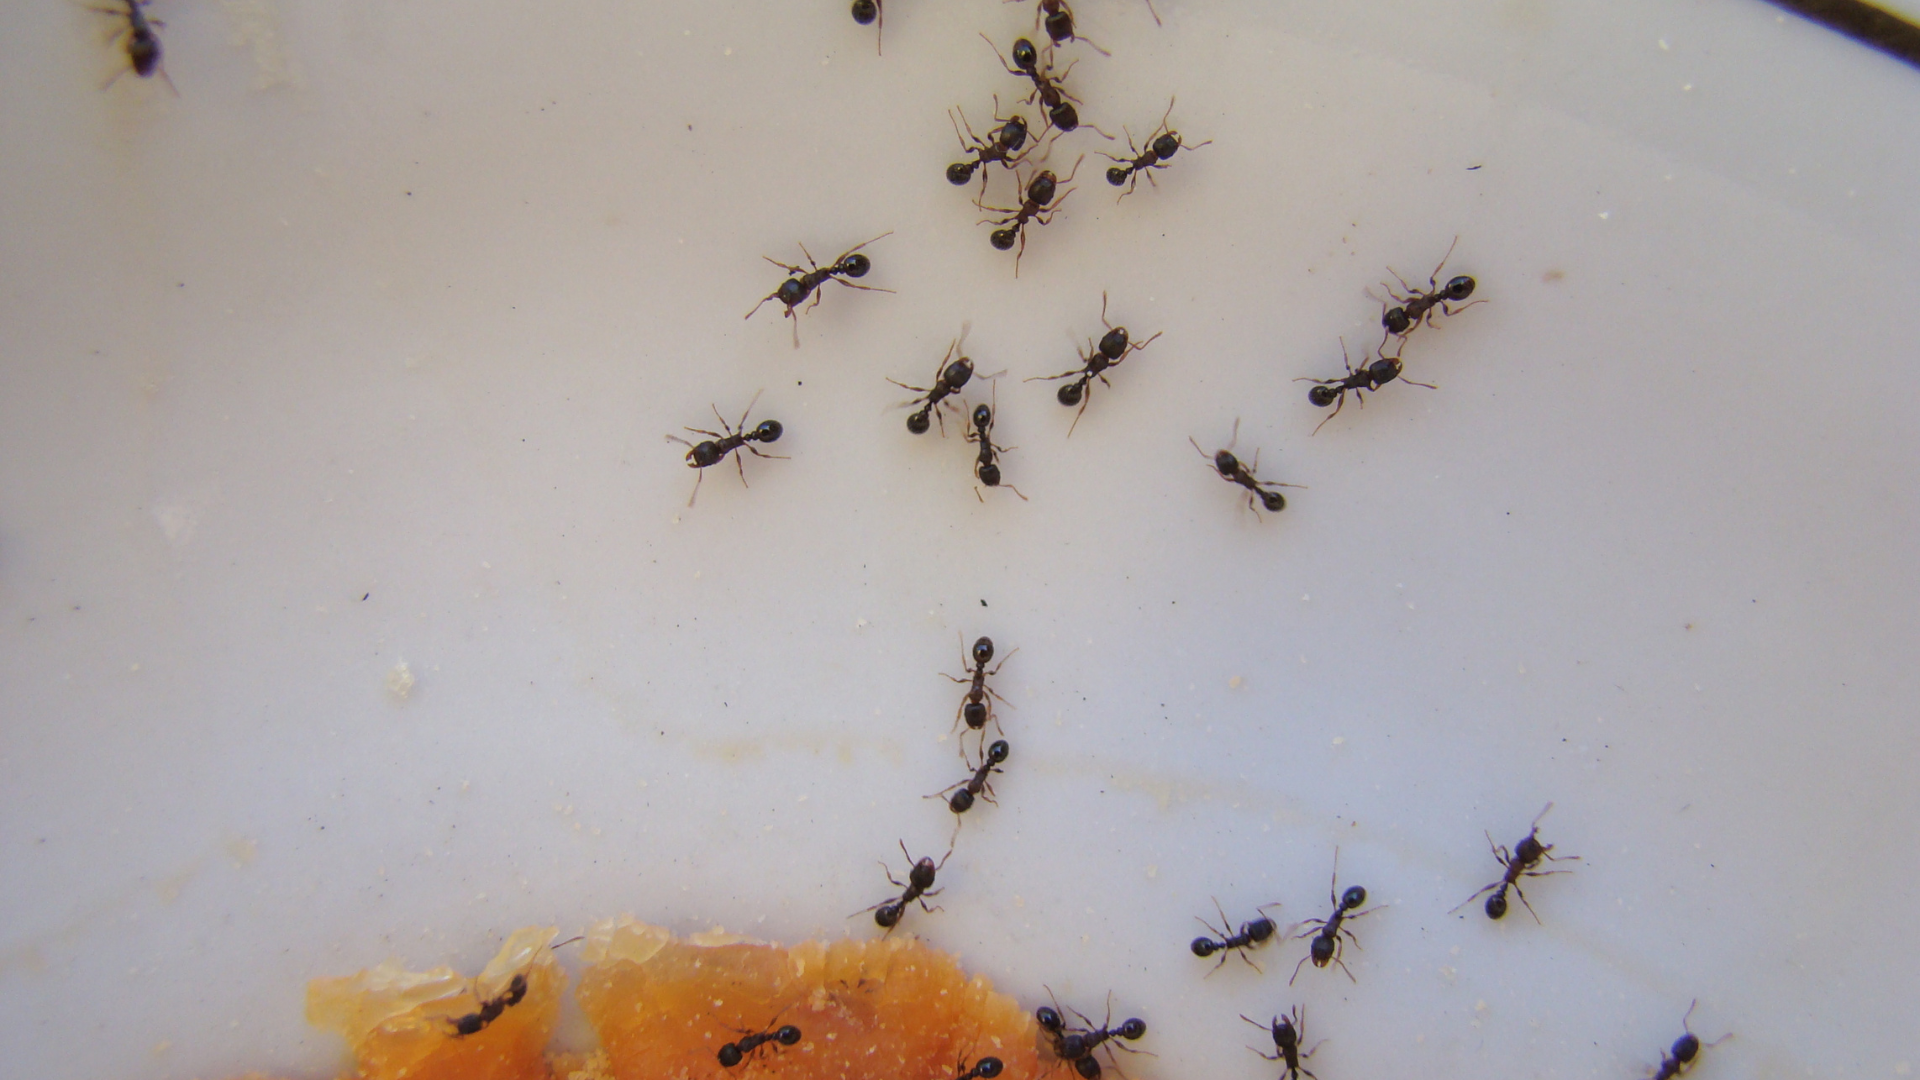 killing ants will almost certainly attract additional workers to the scene.